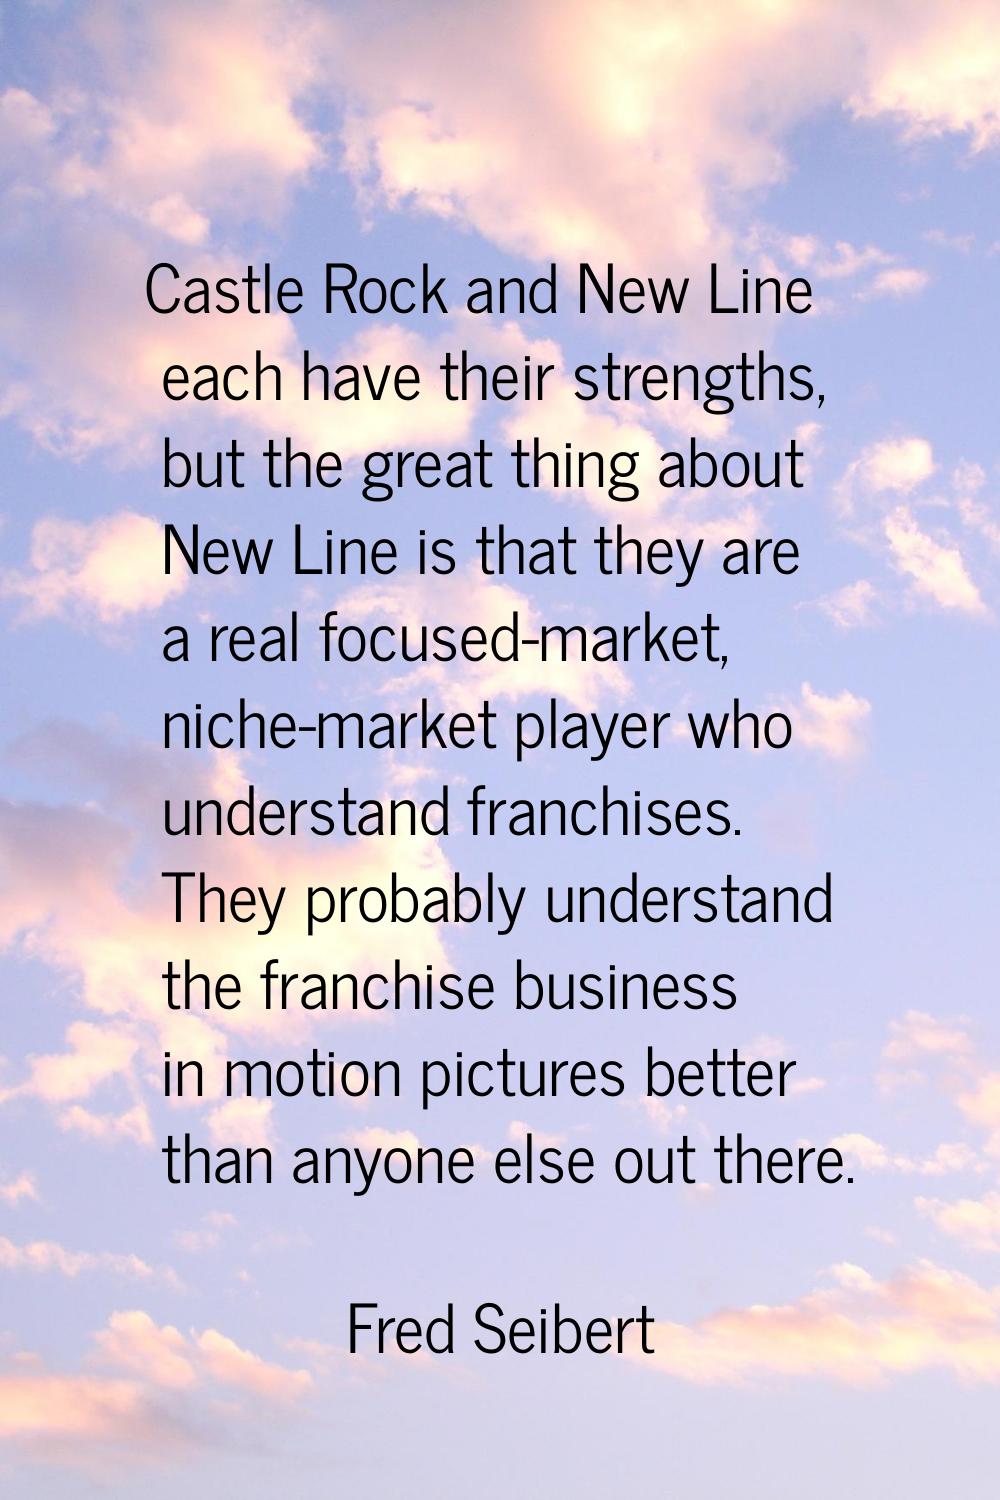 Castle Rock and New Line each have their strengths, but the great thing about New Line is that they